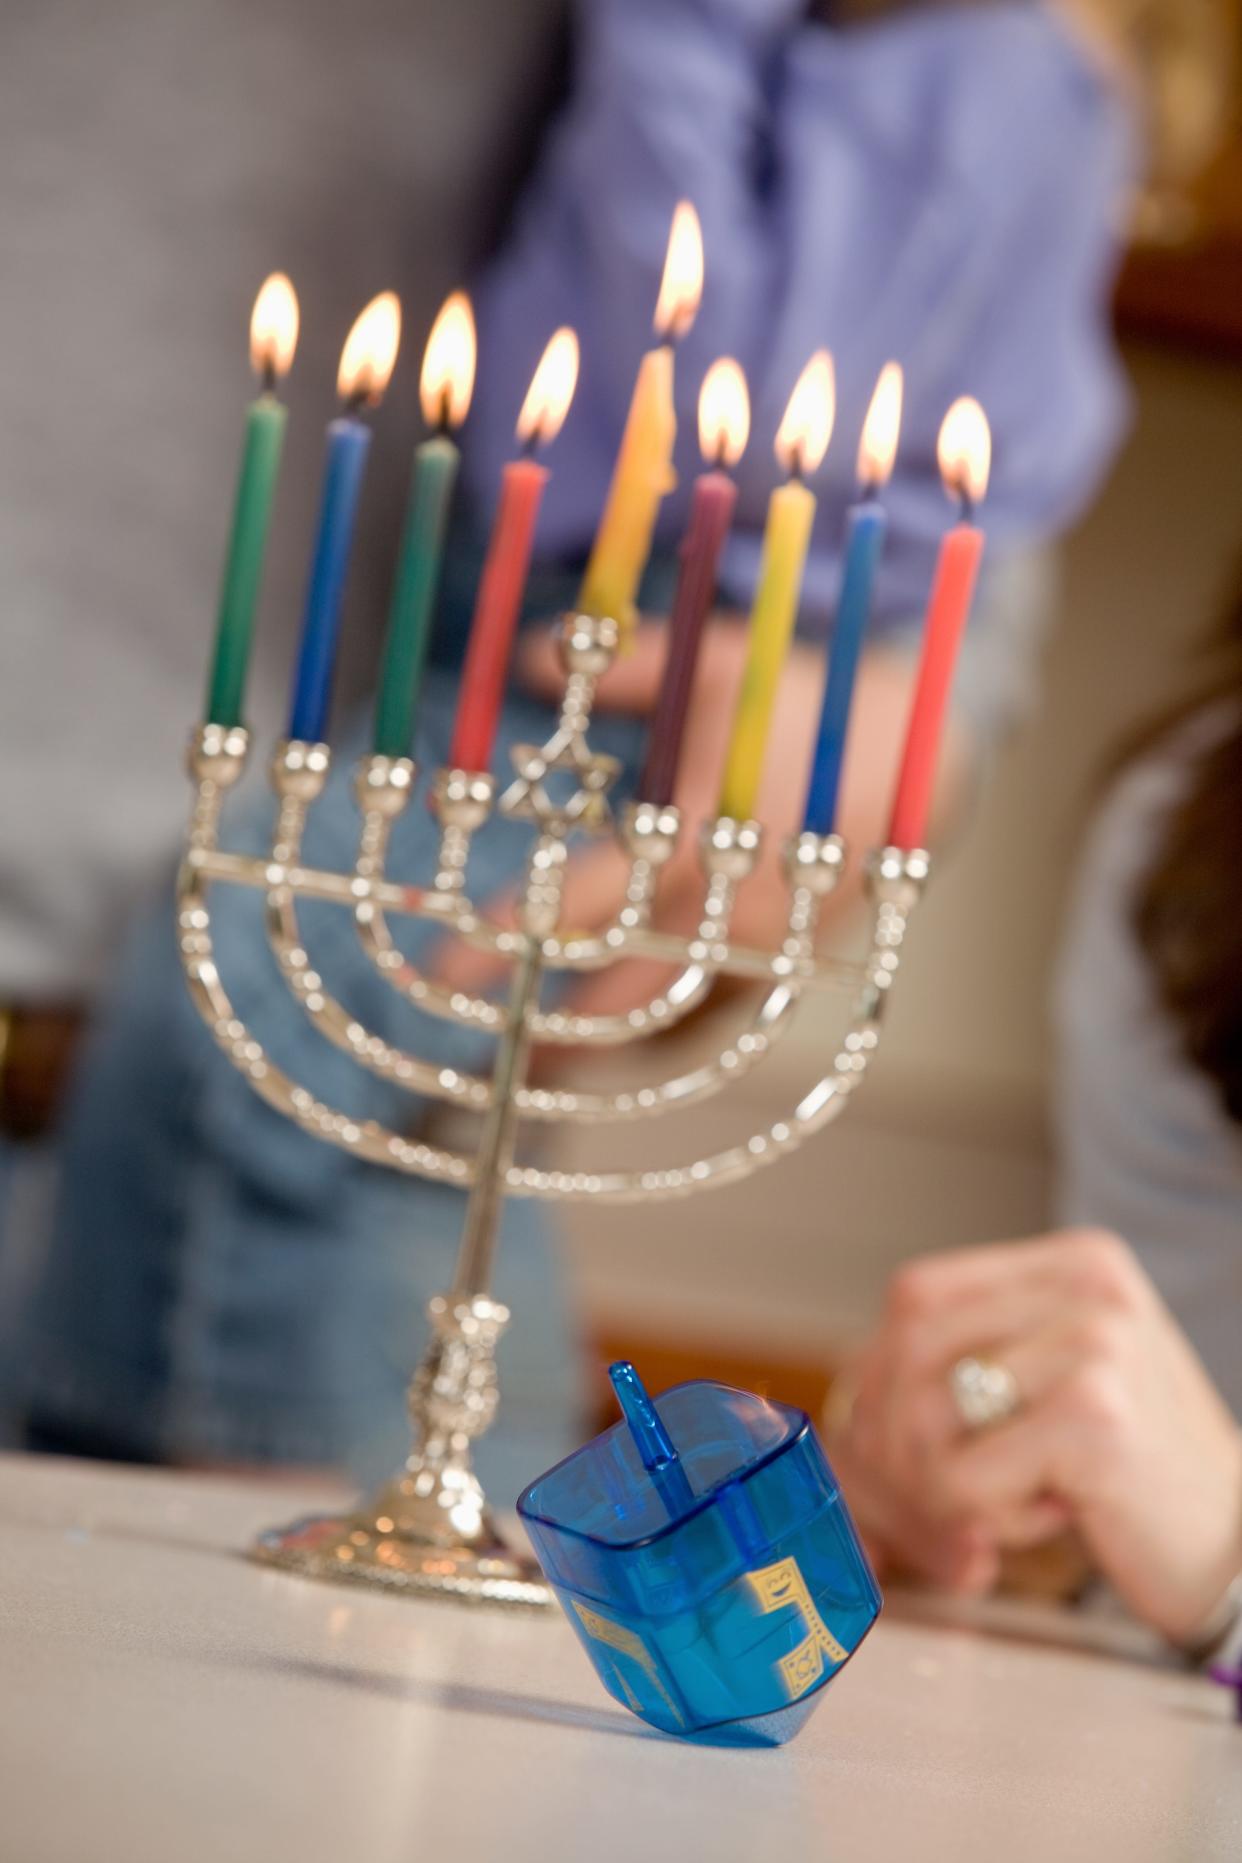 Hanukkah was originally a minor celebration, but has become the most famous Jewish holiday in America.